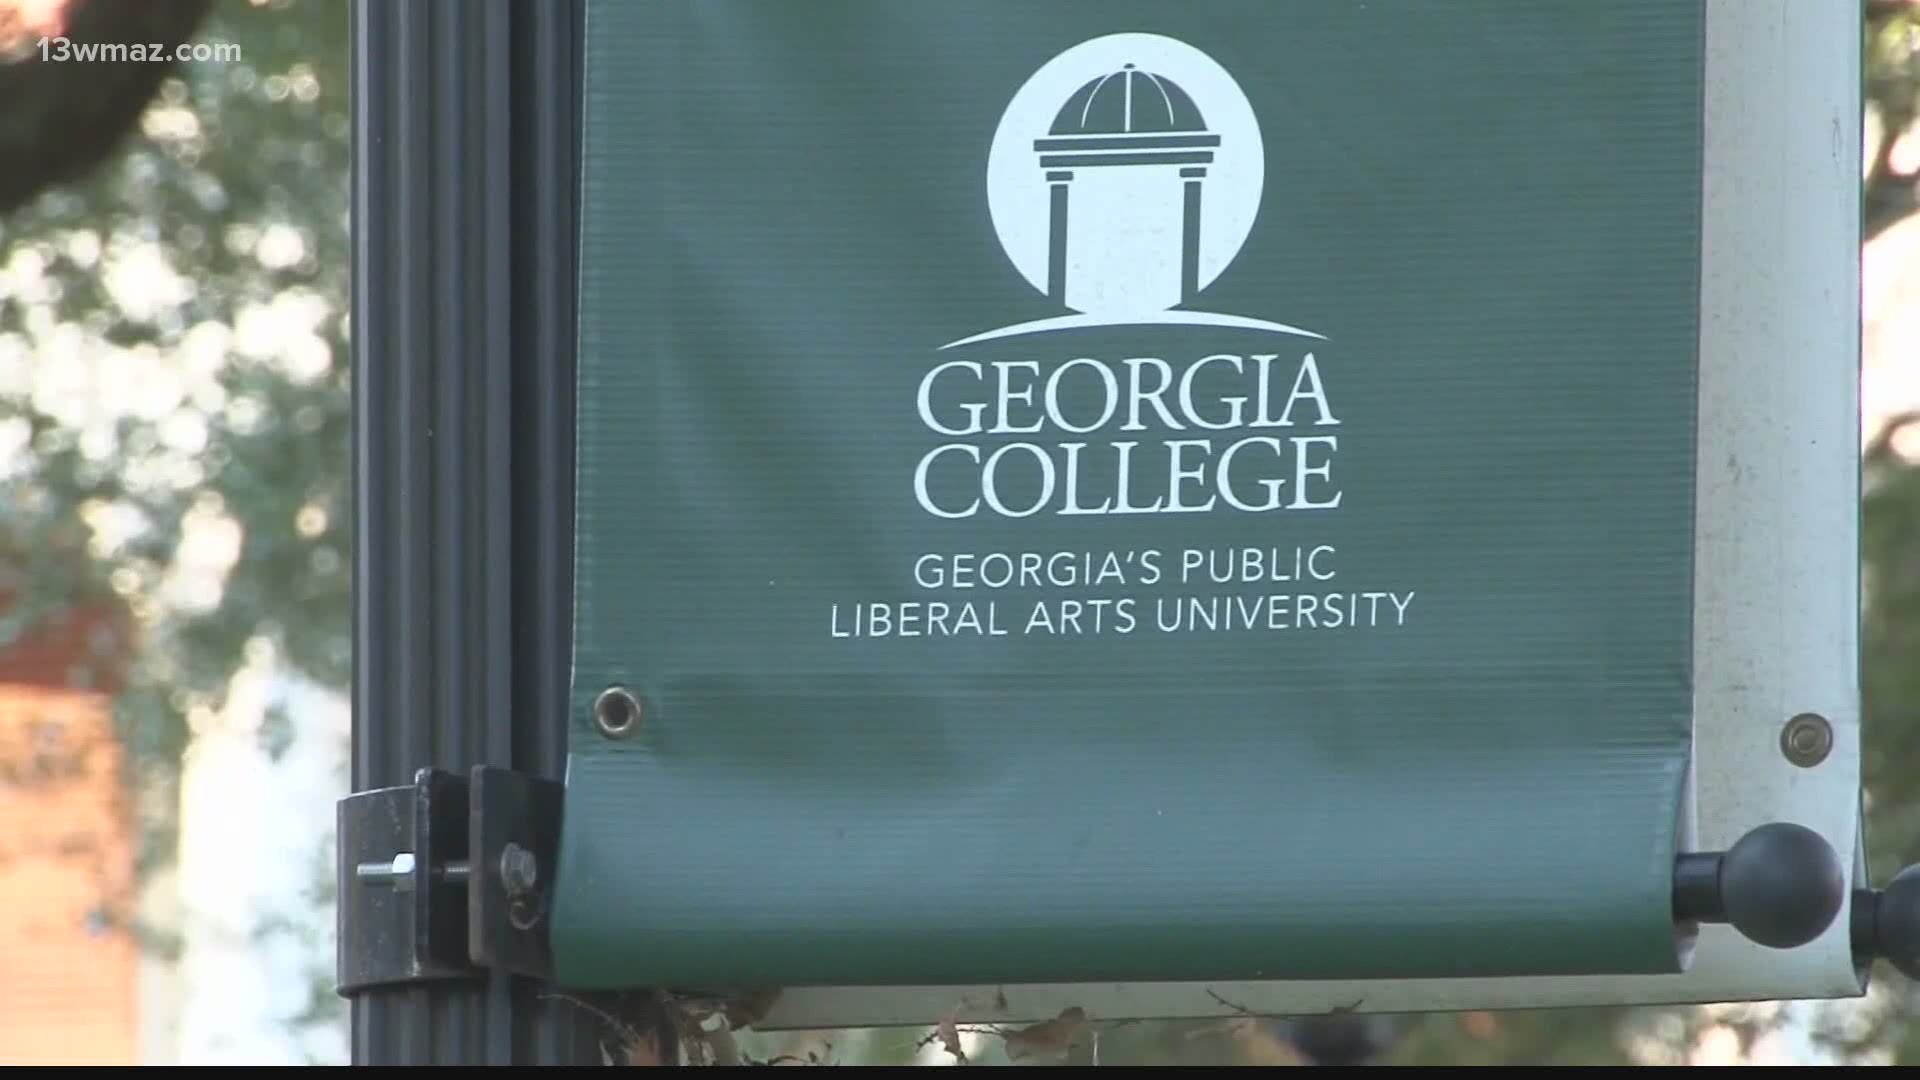 Georgia College in Milledgeville and Middle Georgia State University are reporting positive COVID-19 cases on their websites.